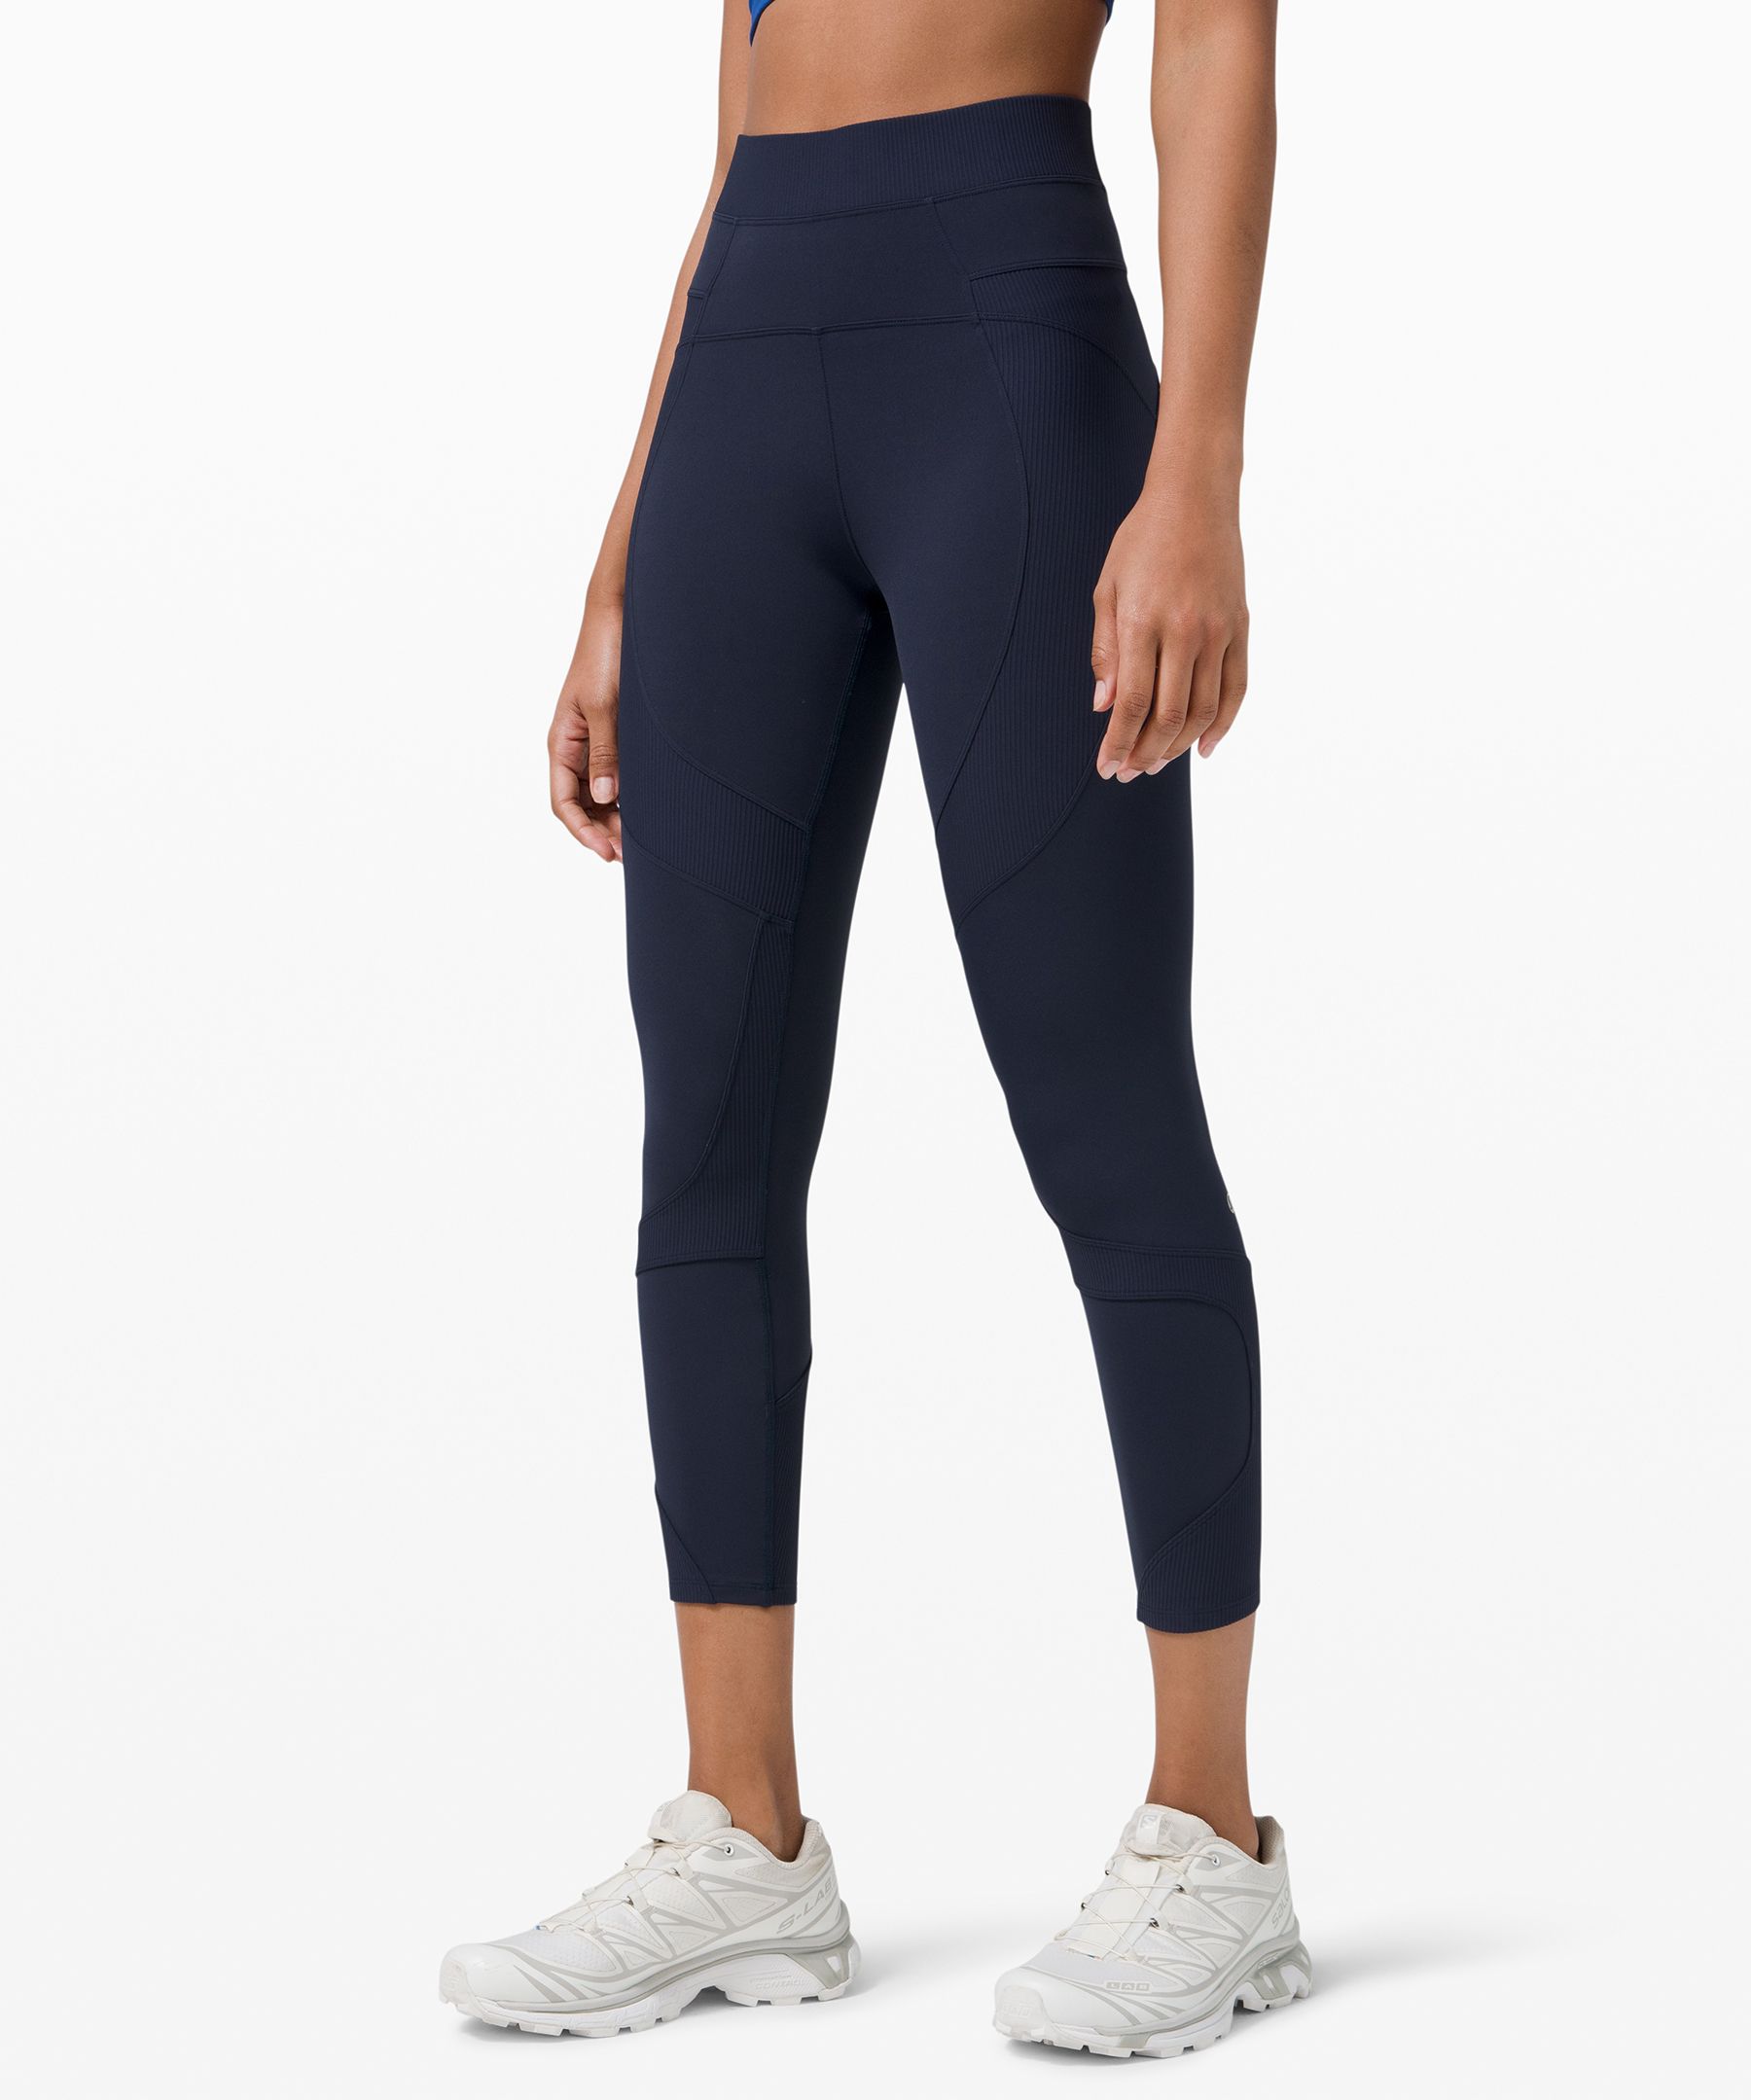 new at lululemon: SmoothCover fabric! - The Sweat Edit